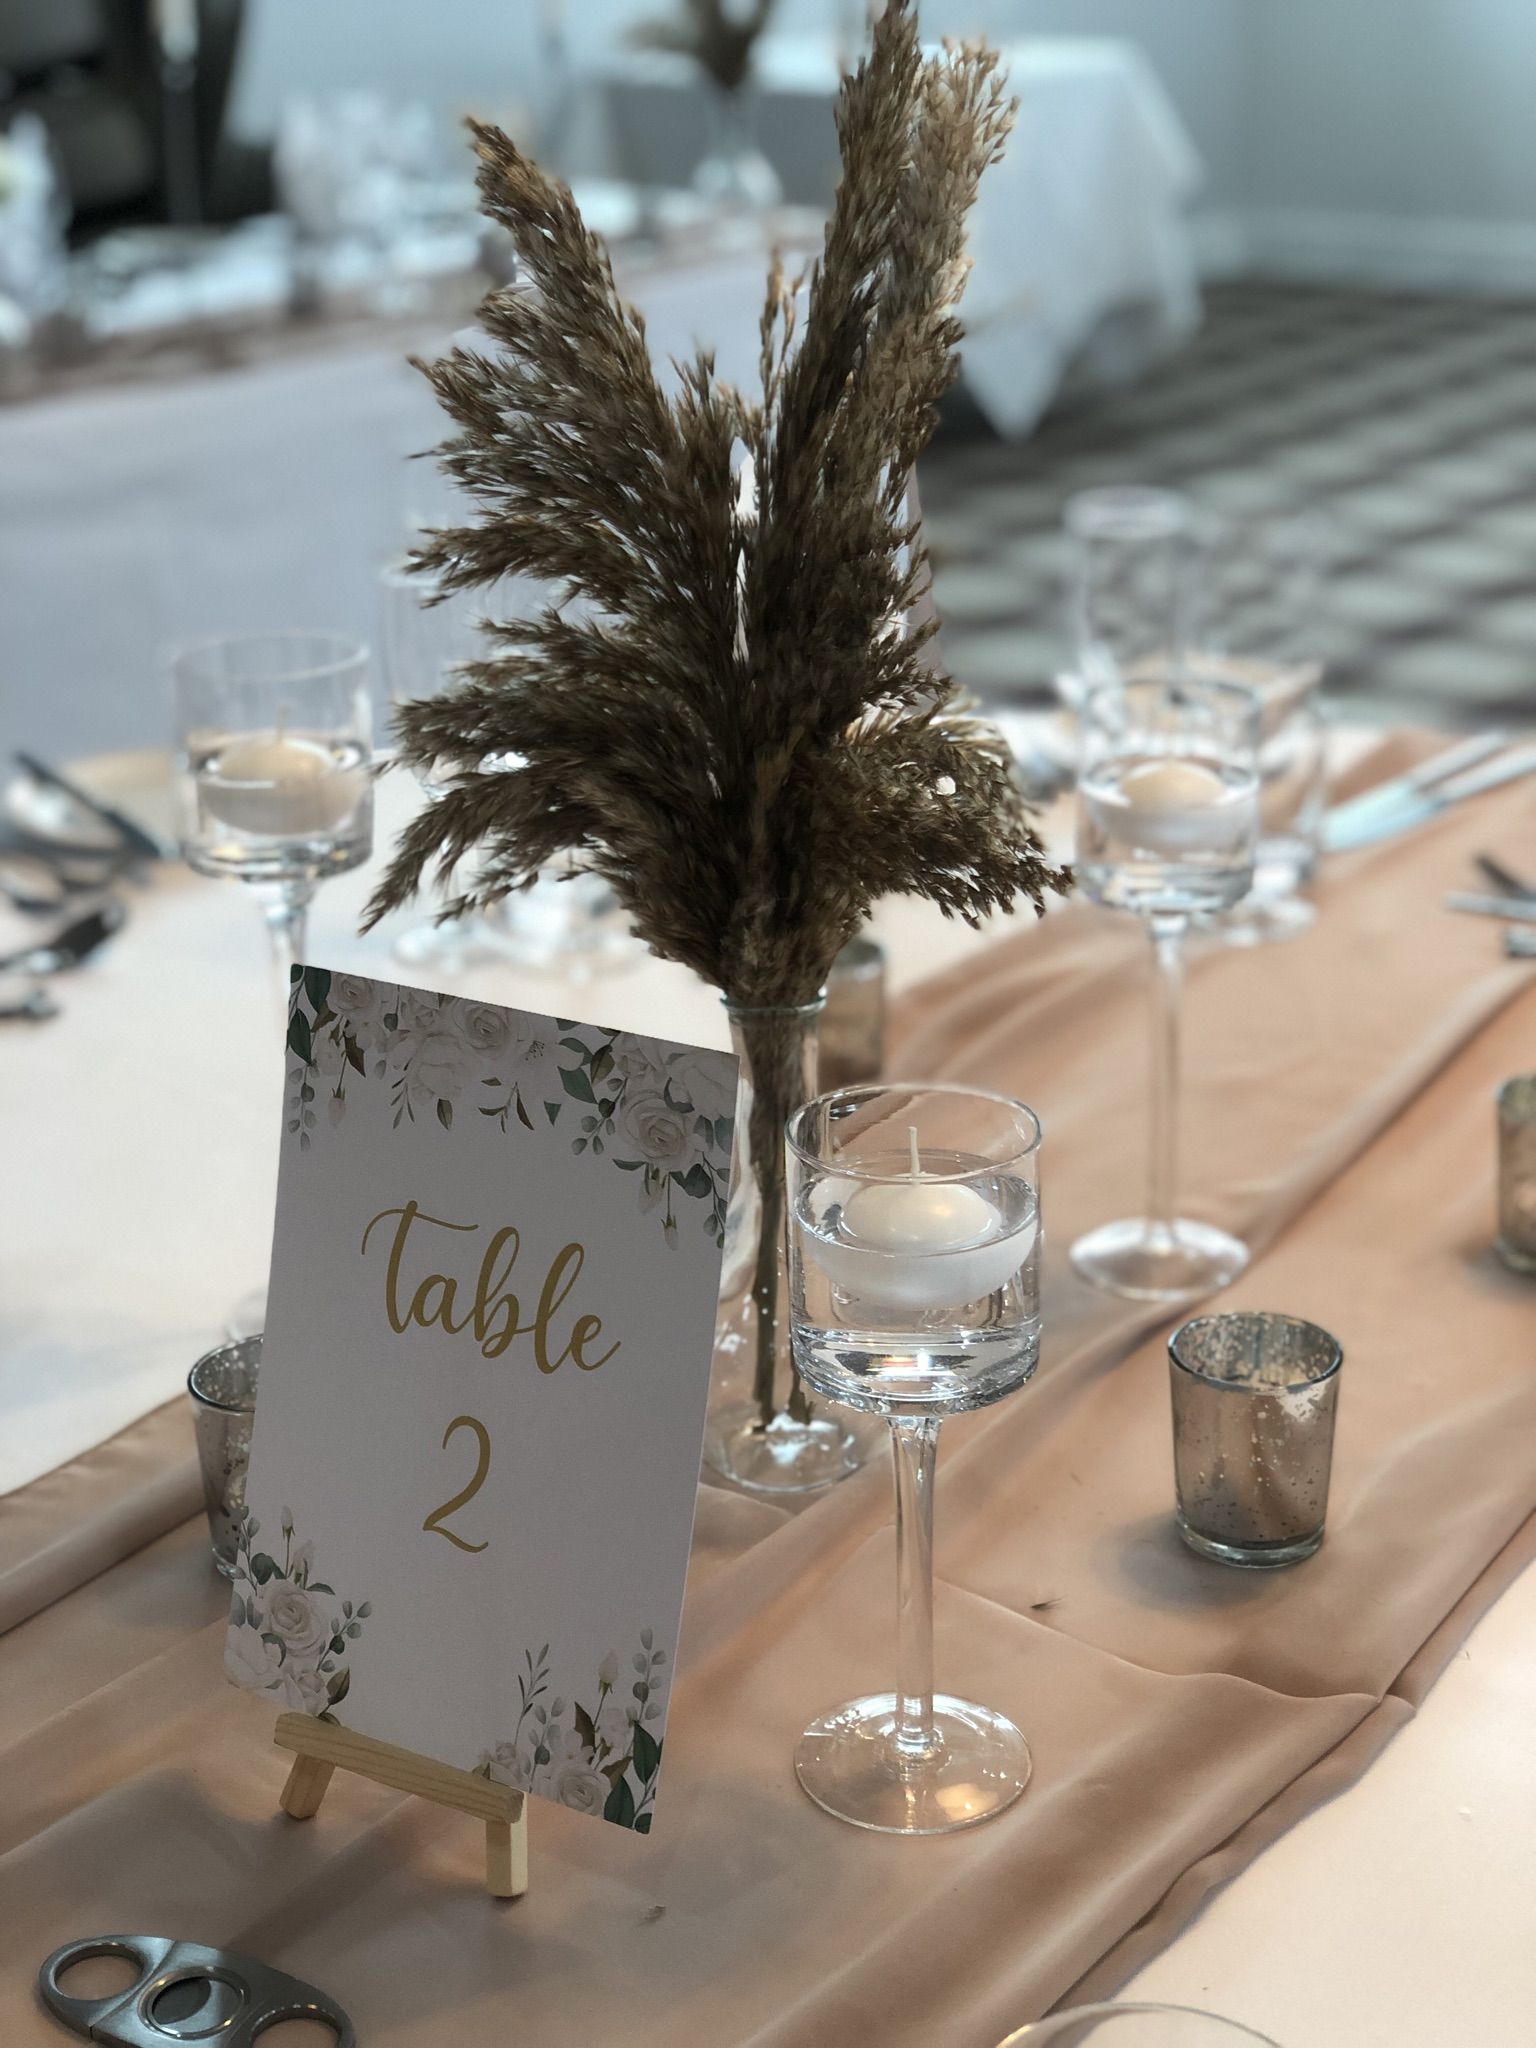 a table is set with a place card and wine glasses.